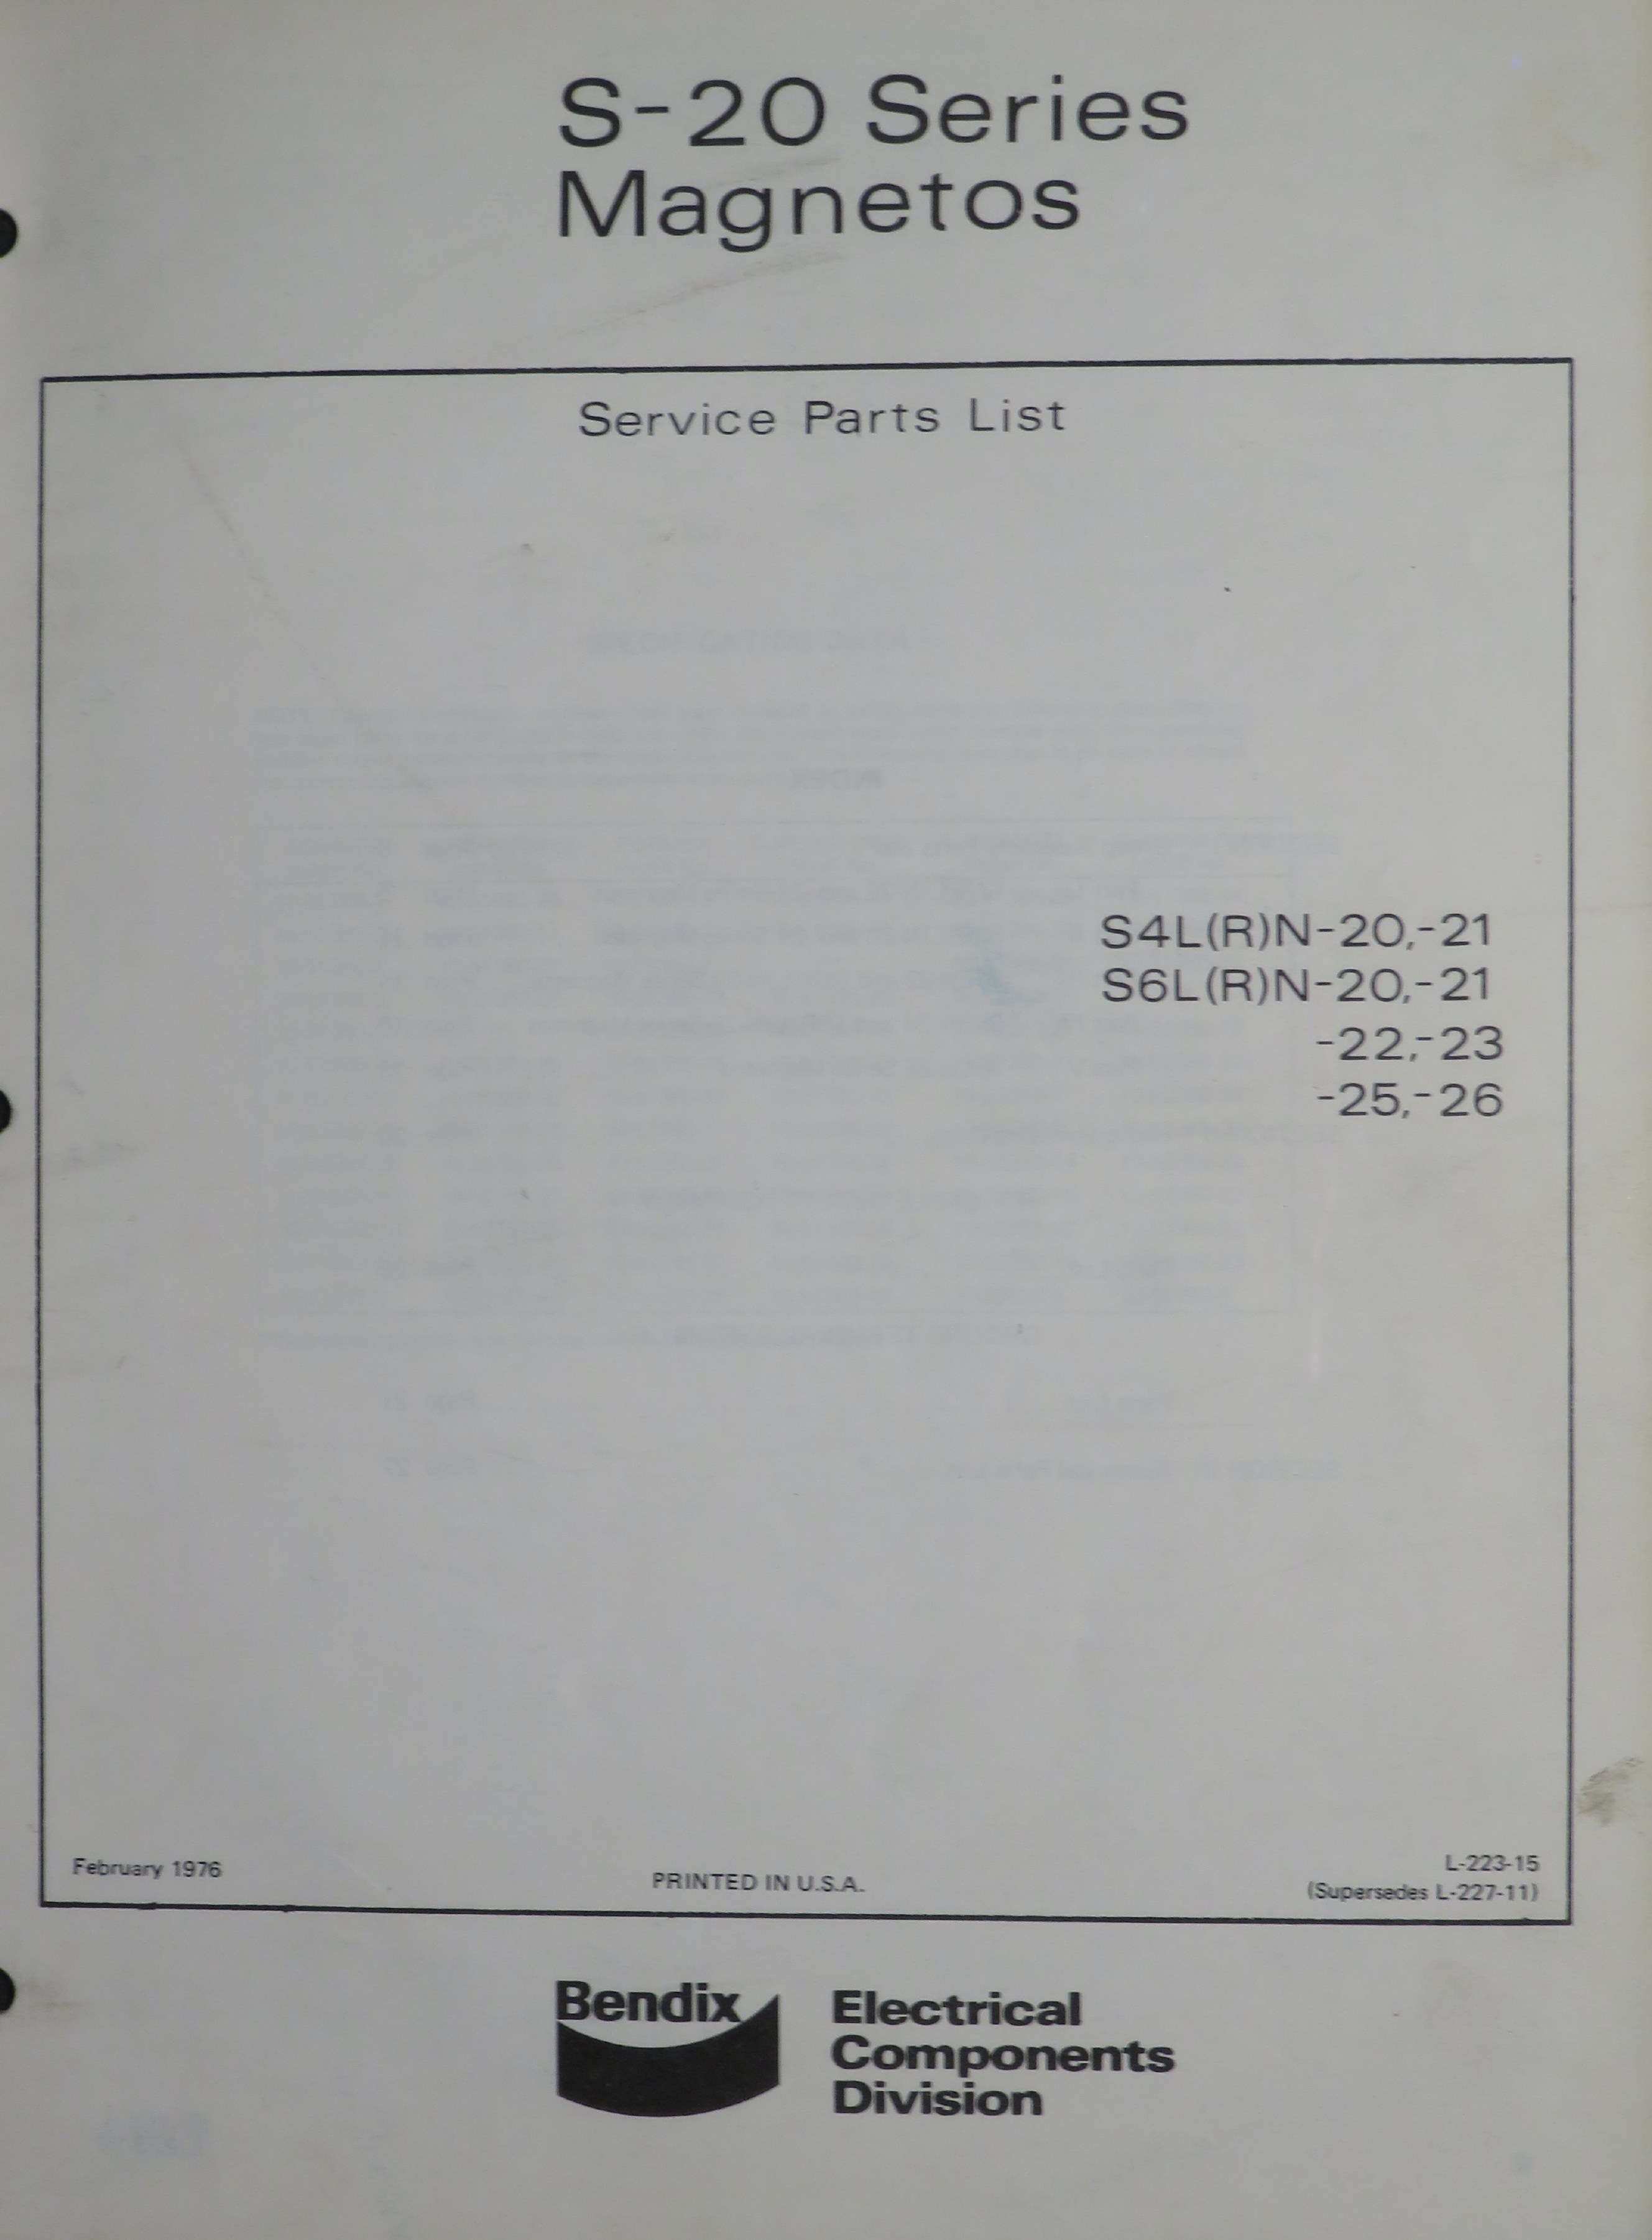 Sample page 1 from AirCorps Library document: Service Parts List for Bendix S-20 Series Magnetos